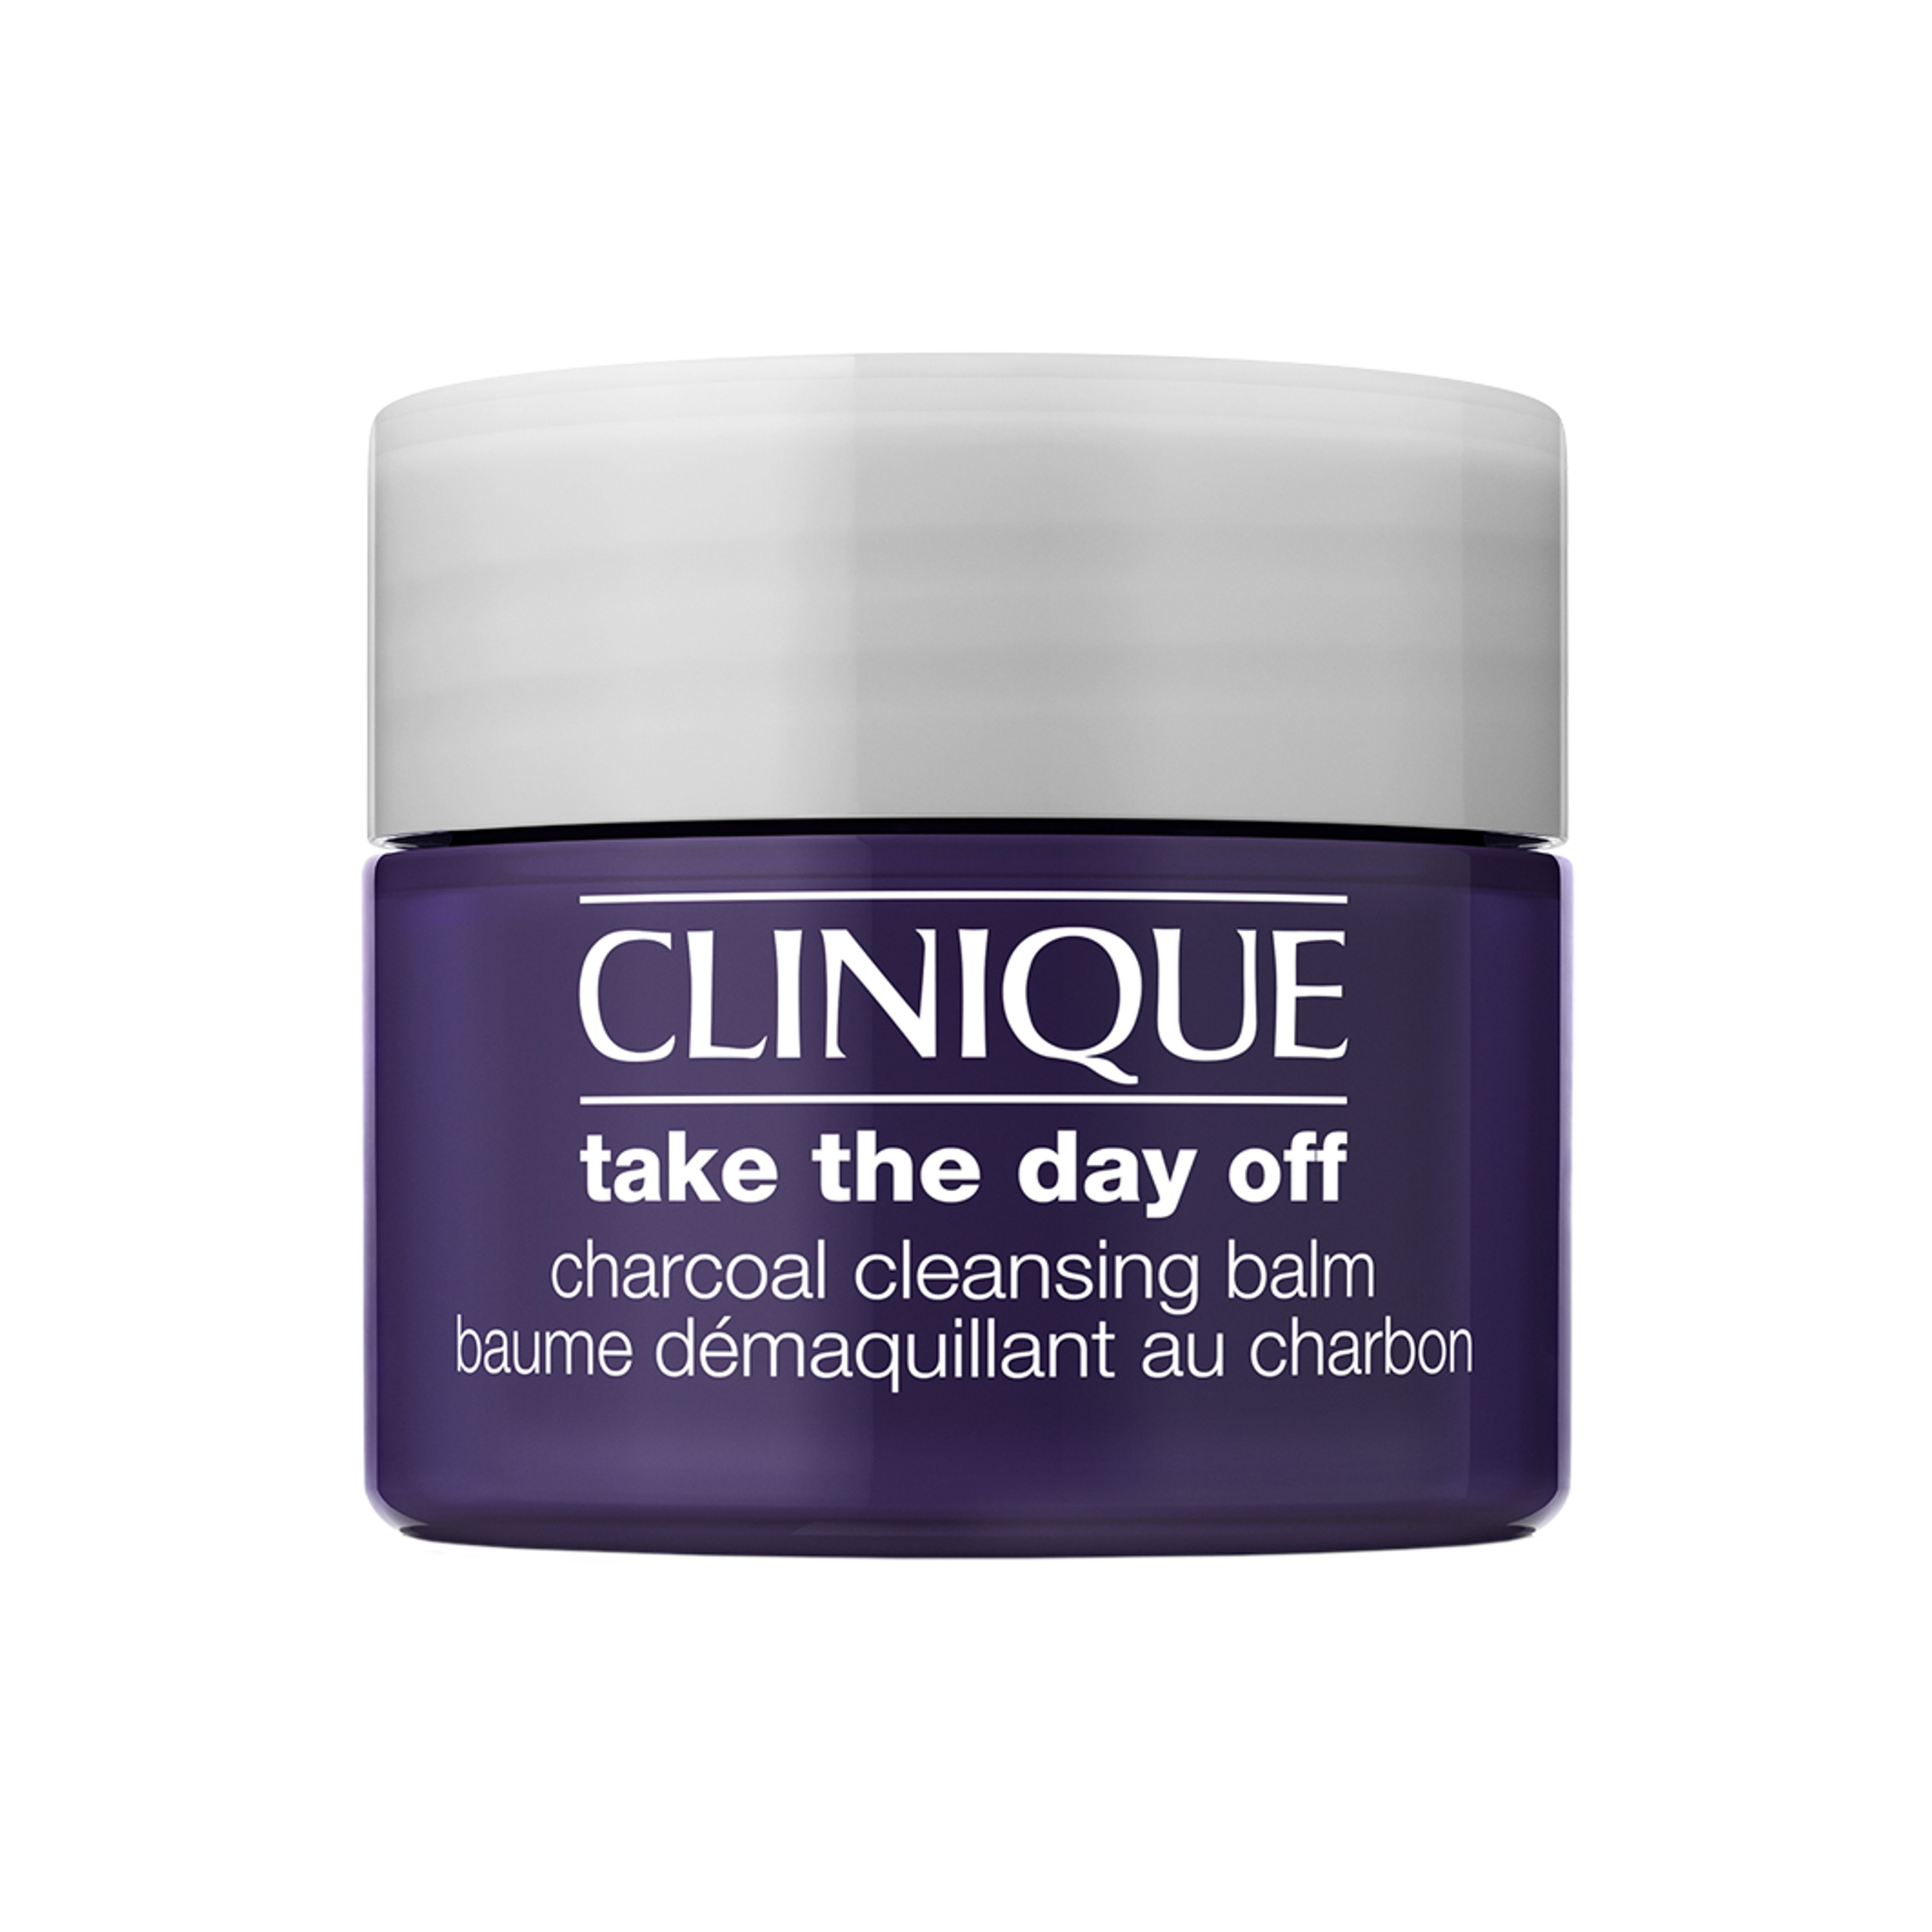 Take The Day Off™ Charcoal Cleansing Balm Clinique 1